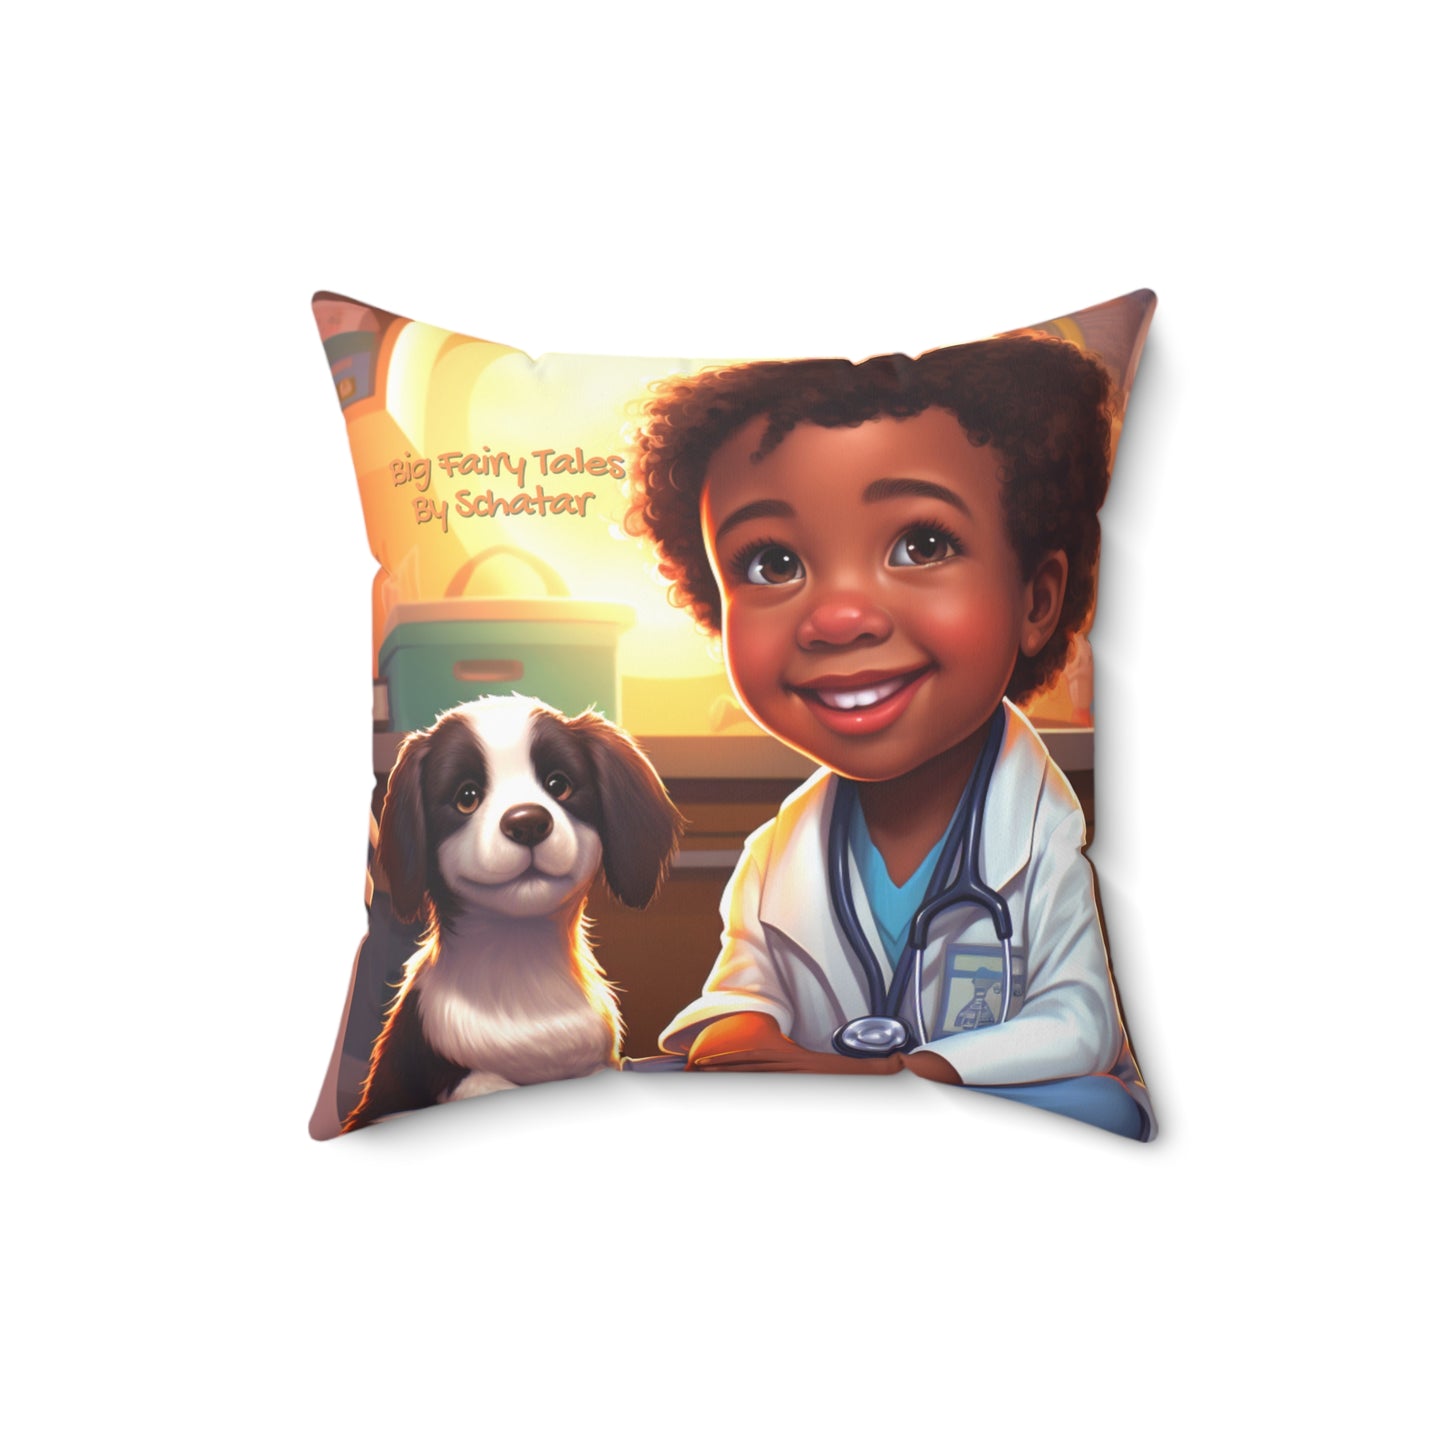 Veterinarian - Big Little Professionals Plush Pillow 6 From Big Fairy Tales By Schatar